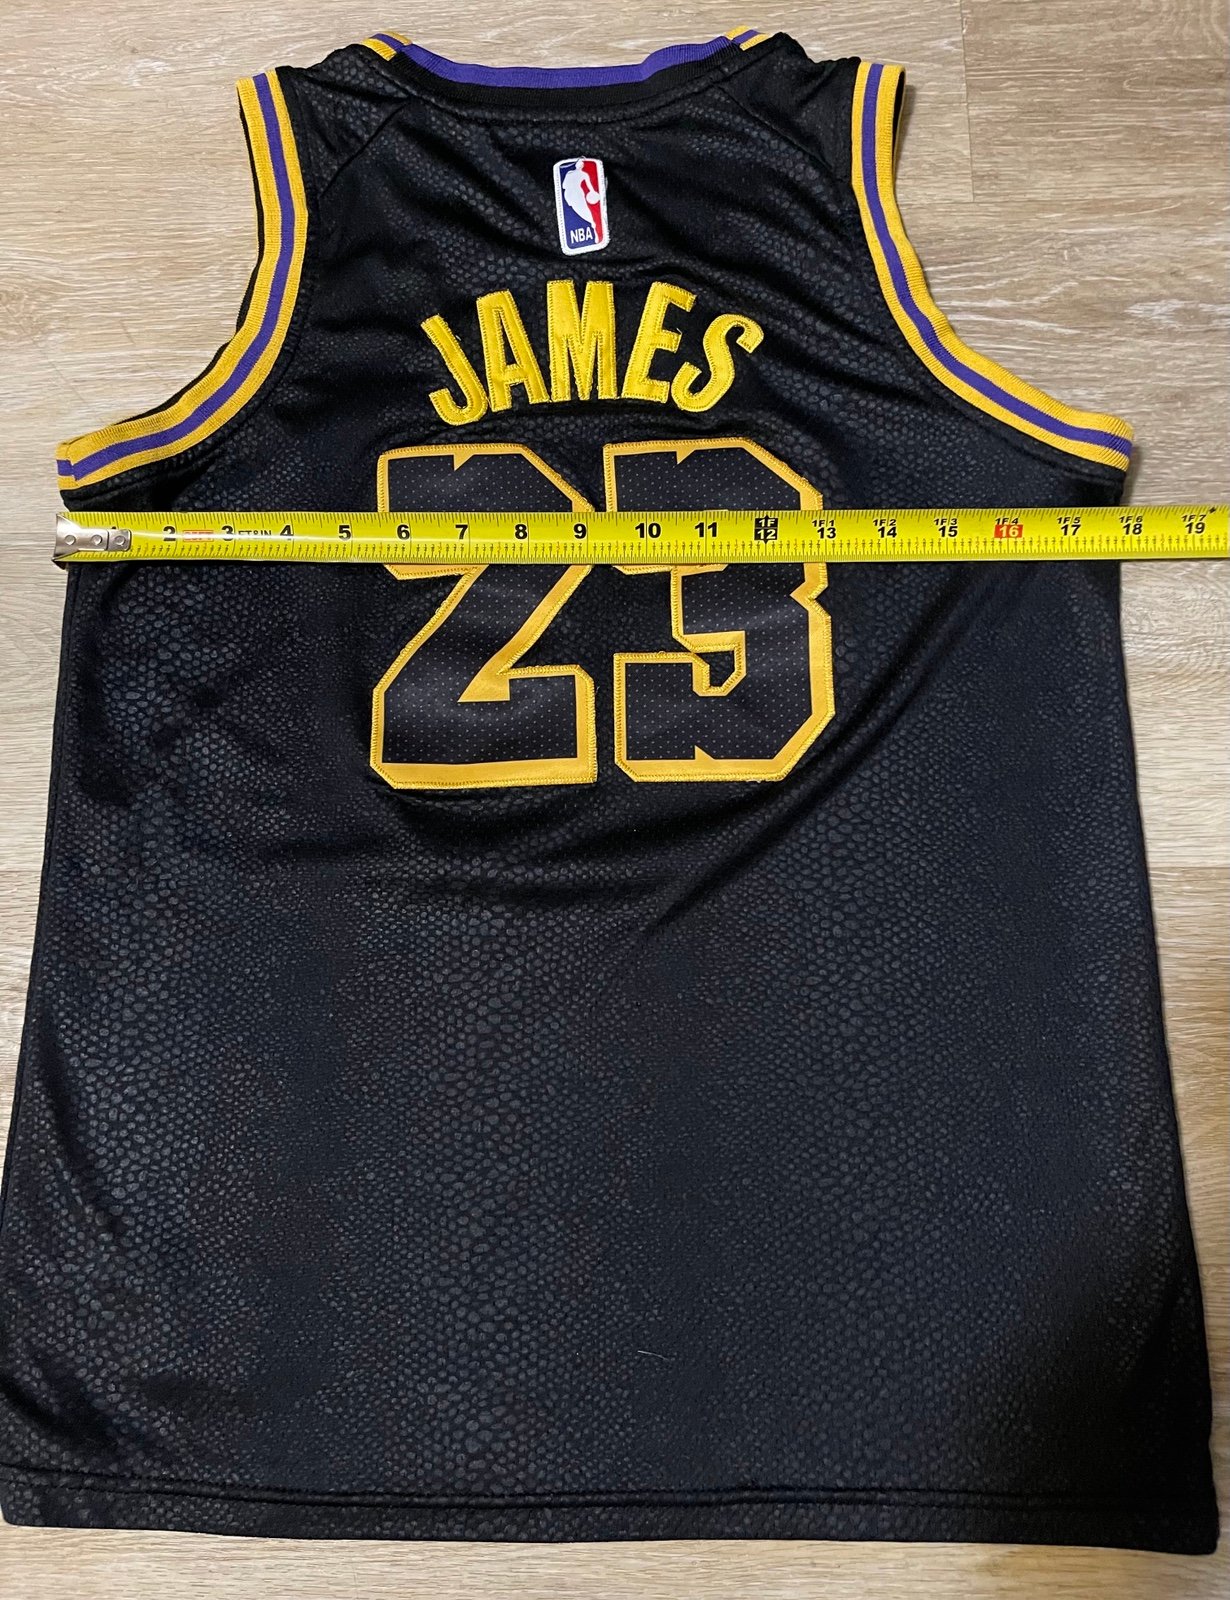 LeBron James LA Lakers Nike Swingman Jersey Stitched Letters #23 Youth Med fSpbJqH8g